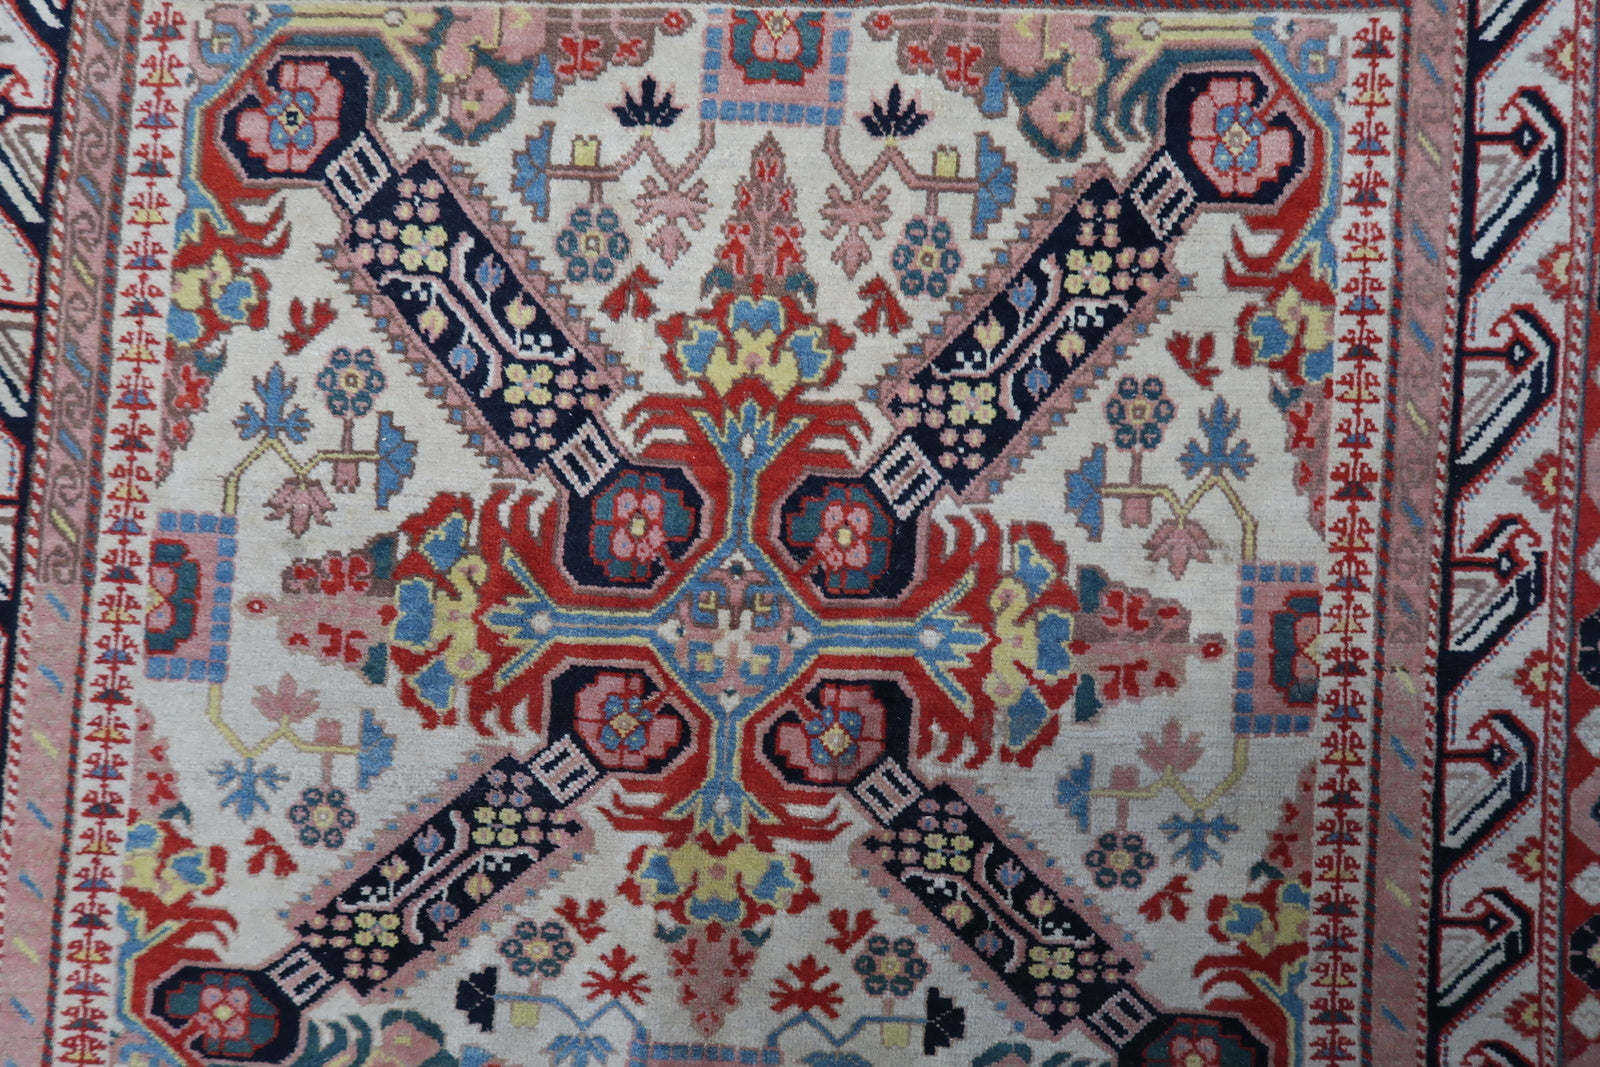 Detailed shot highlighting the intricate patterns and vibrant color palette of the rug